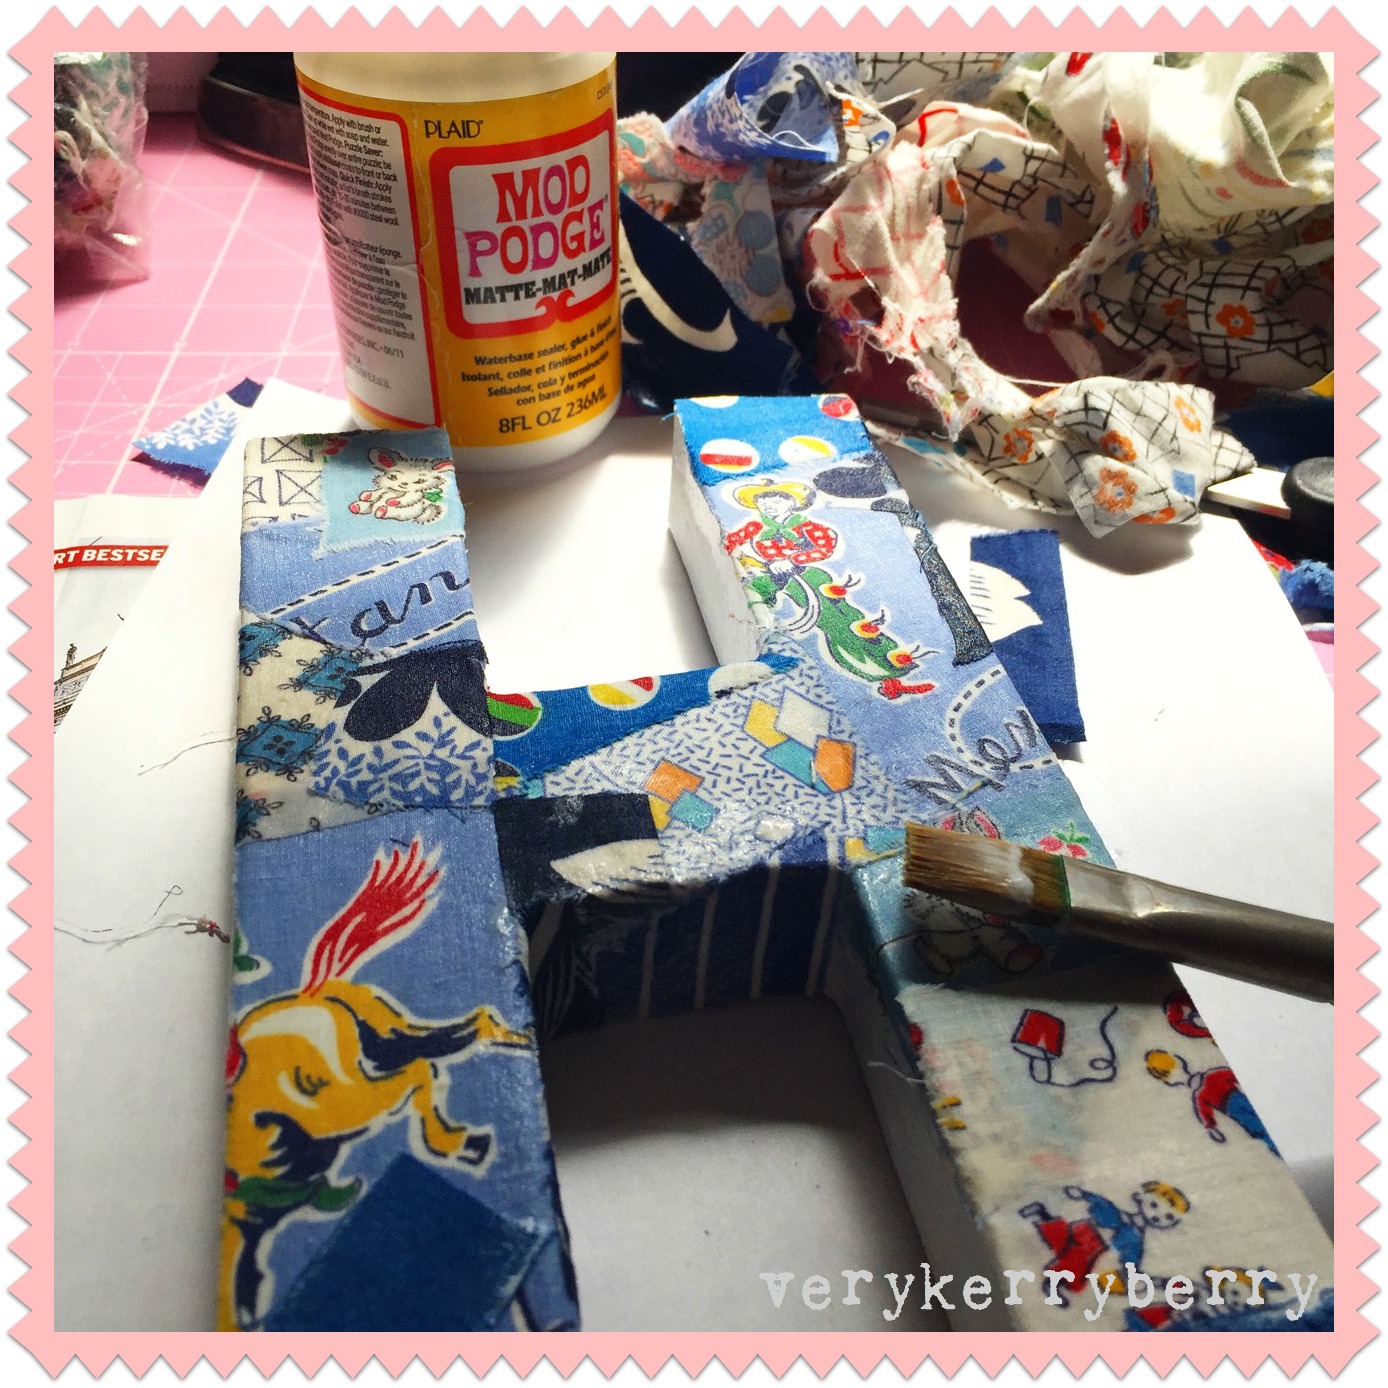 verykerryberry: Scrappy Fabric Mod Podge Project